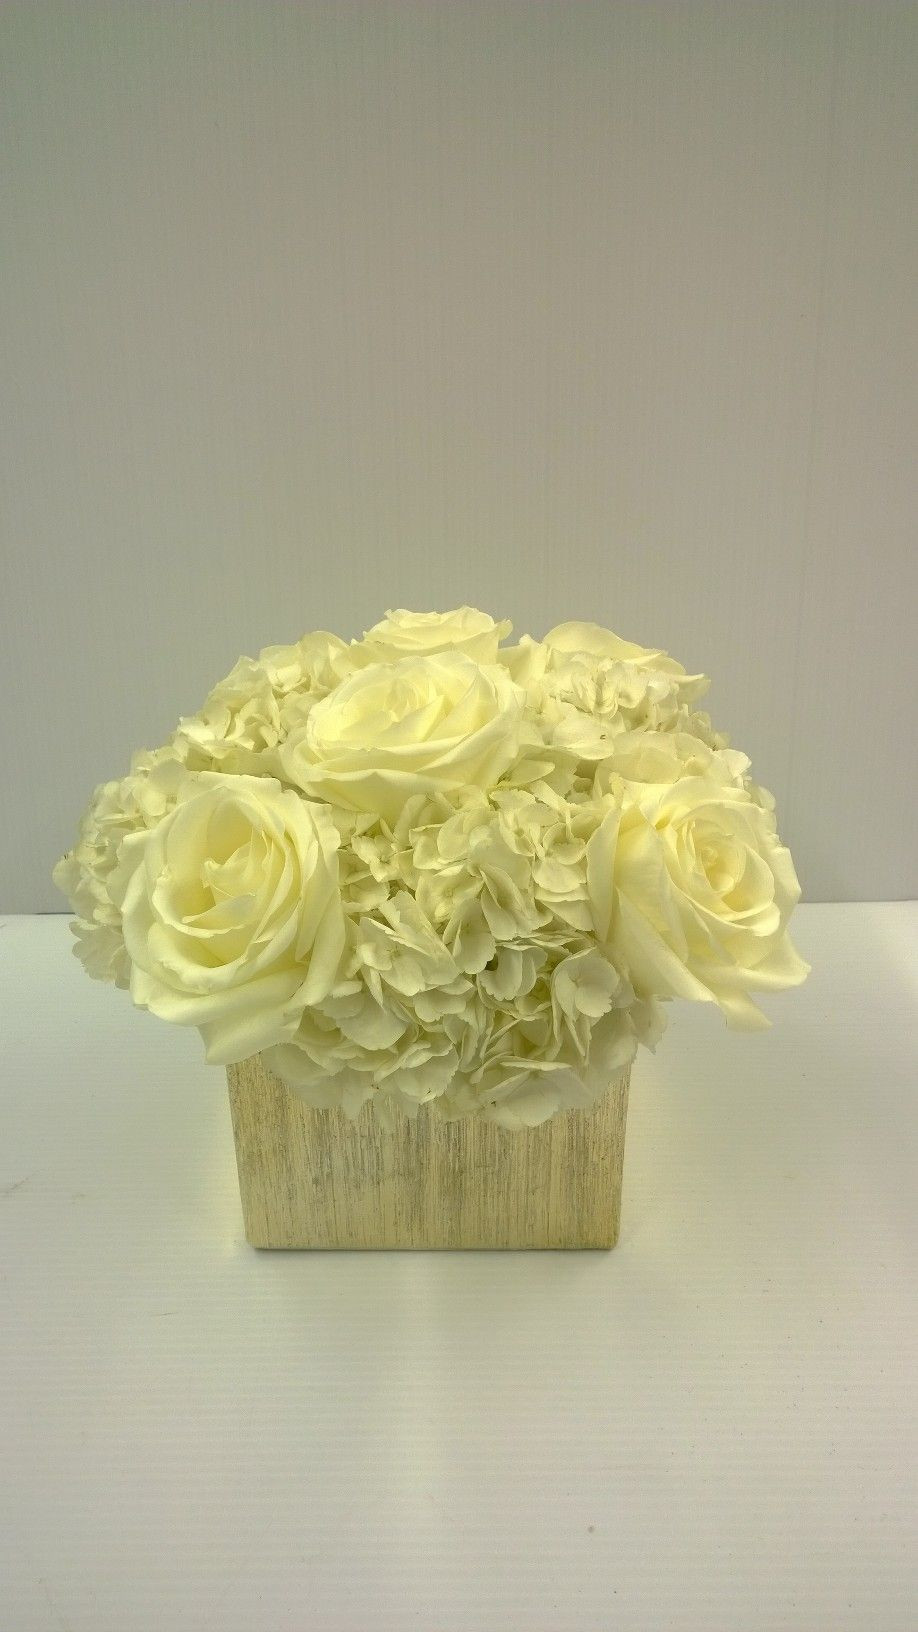 27 Wonderful 6 Glass Cube Vase 2024 free download 6 glass cube vase of gold vase centerpiece gold ceramic cube with 3 white hydrangeas in gold vase centerpiece gold ceramic cube with 3 white hydrangeas and 6 white open roses